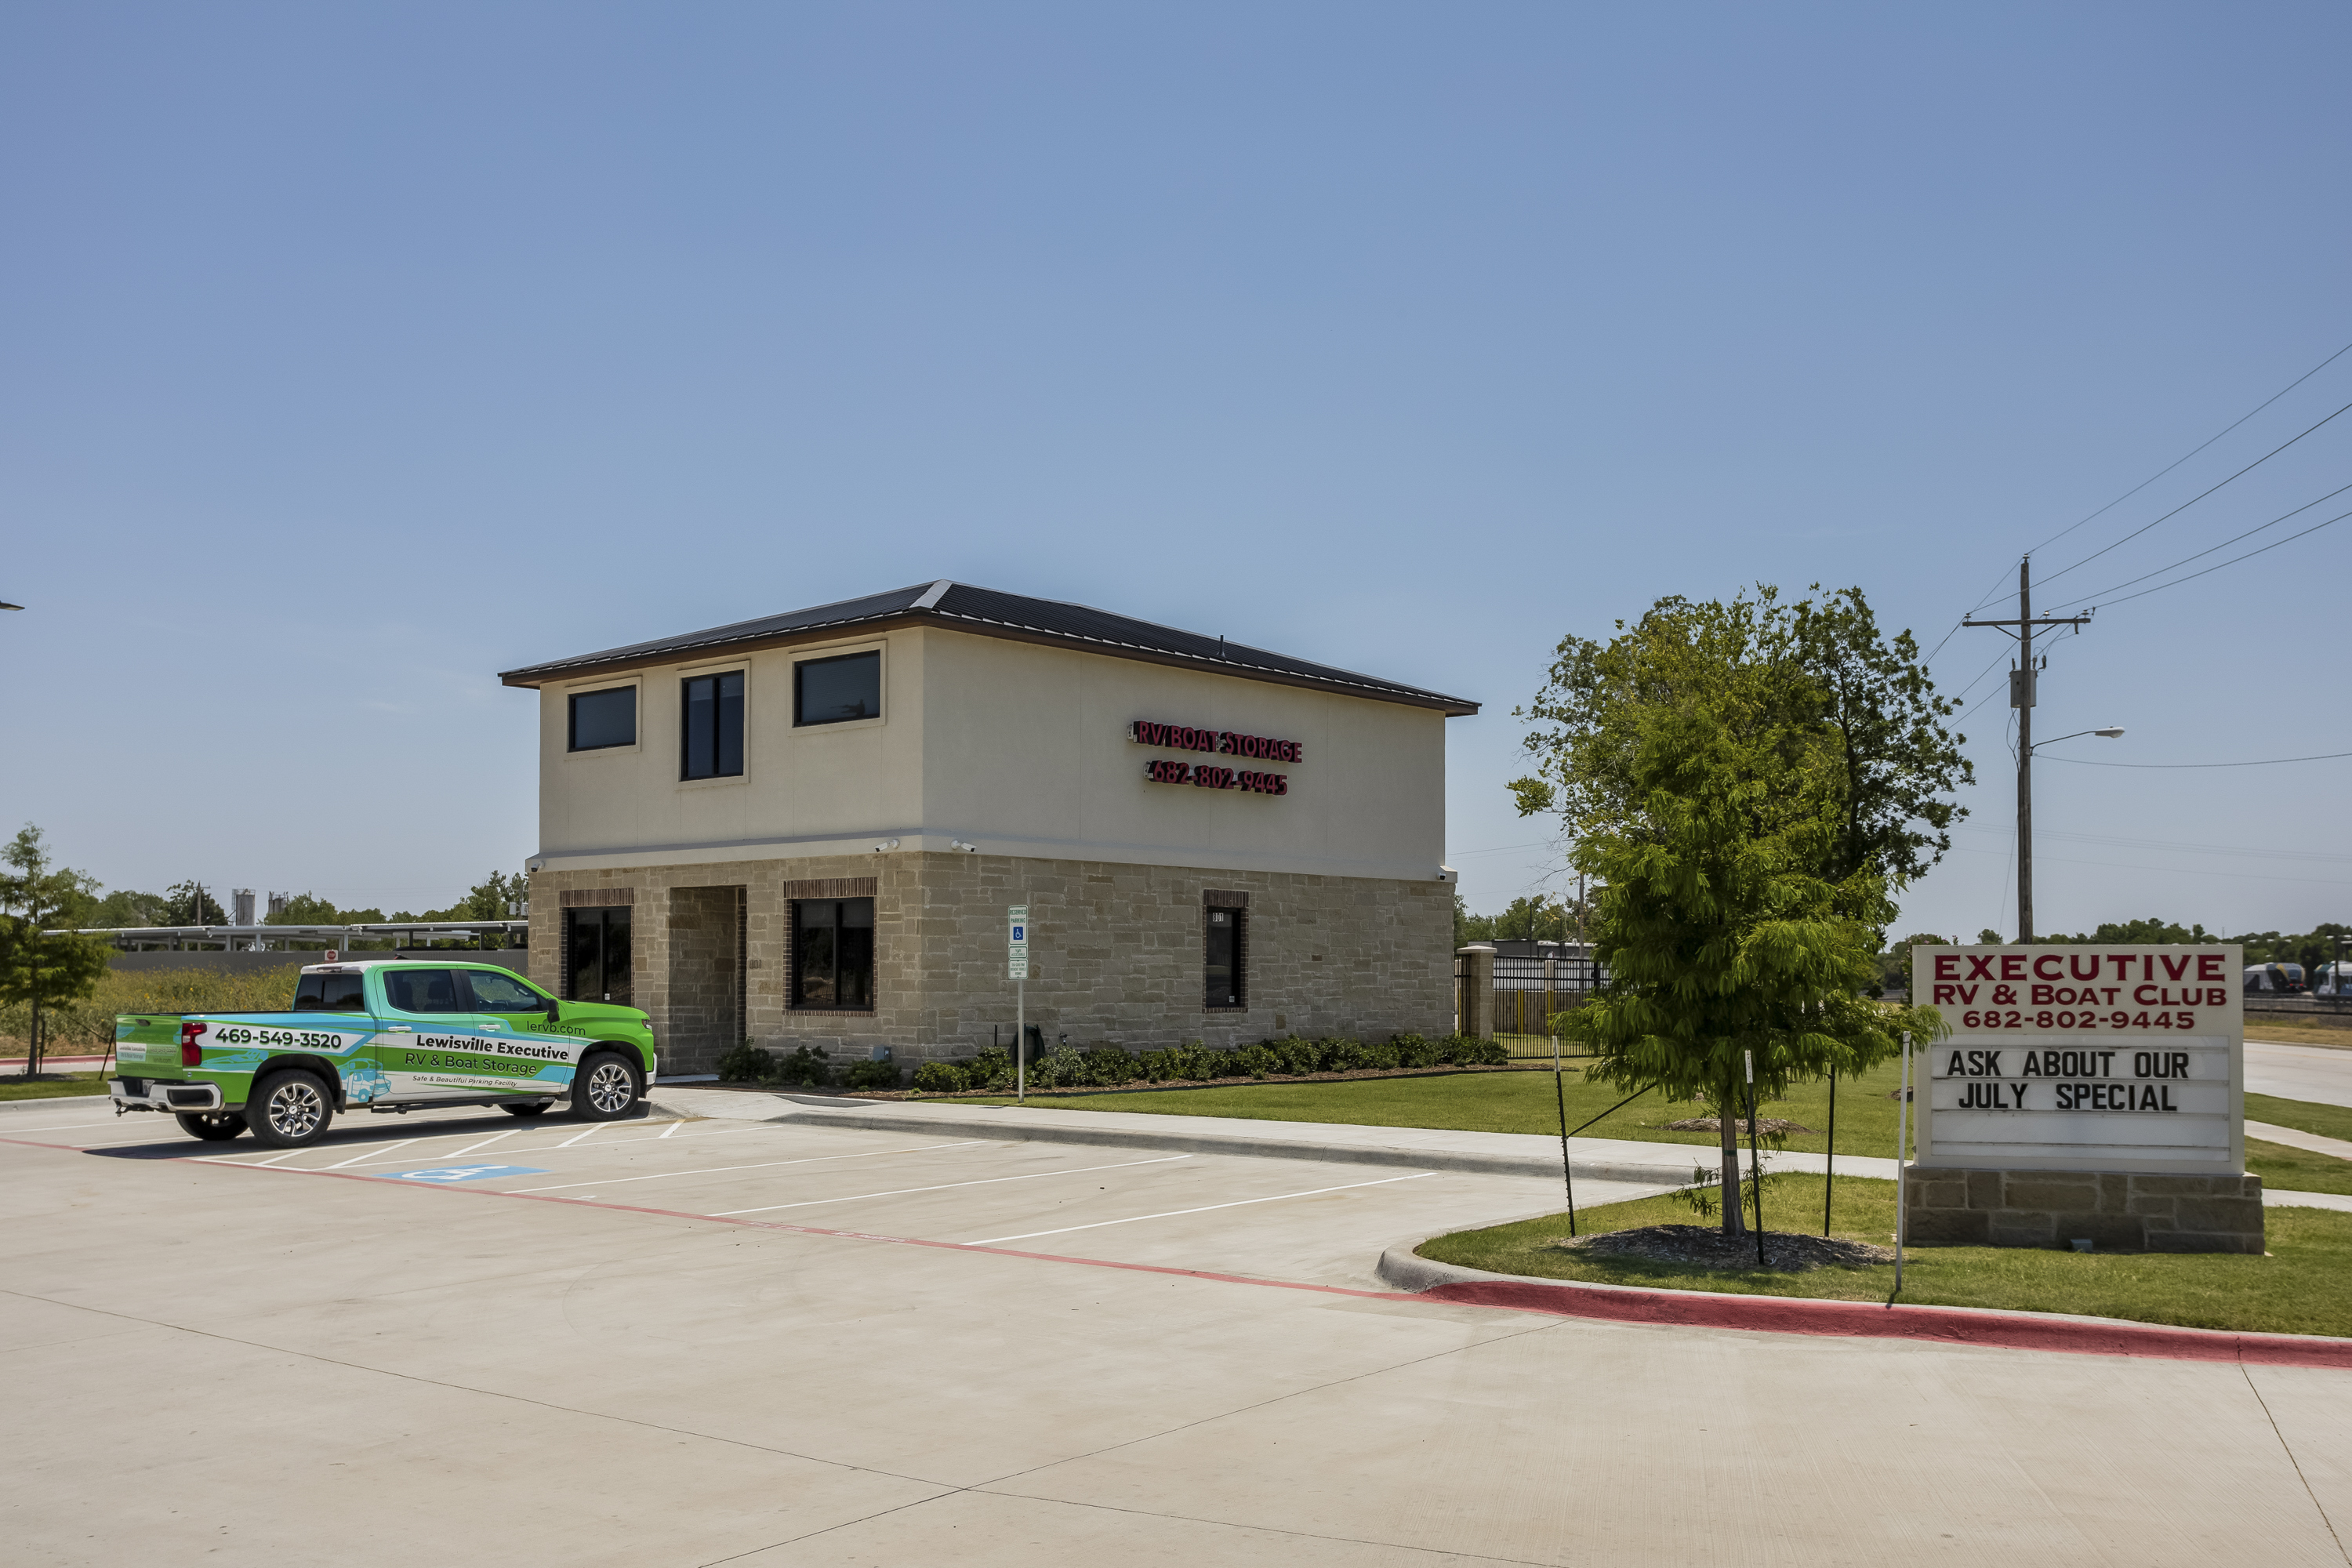 Lewisville Executive RV and Boat Club